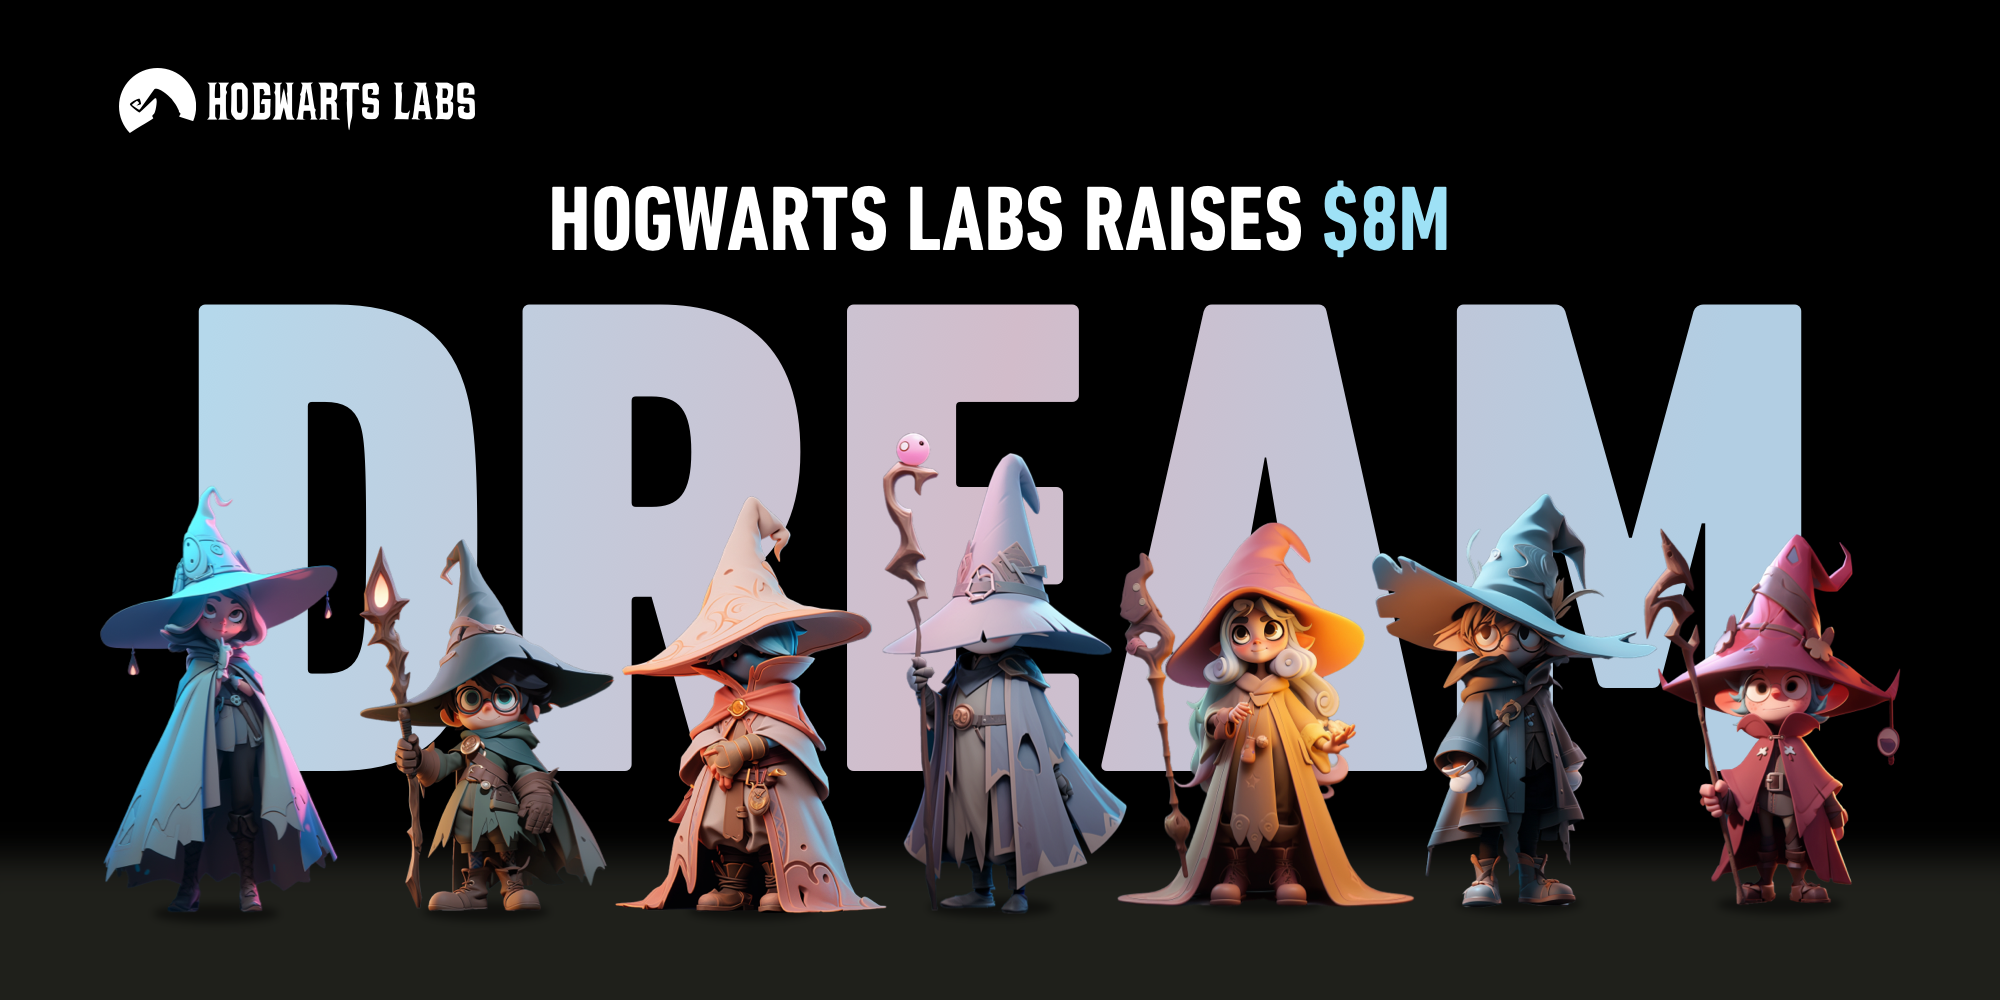 Hogwarts Labs, Wednesday, May 31, 2023, Press release picture